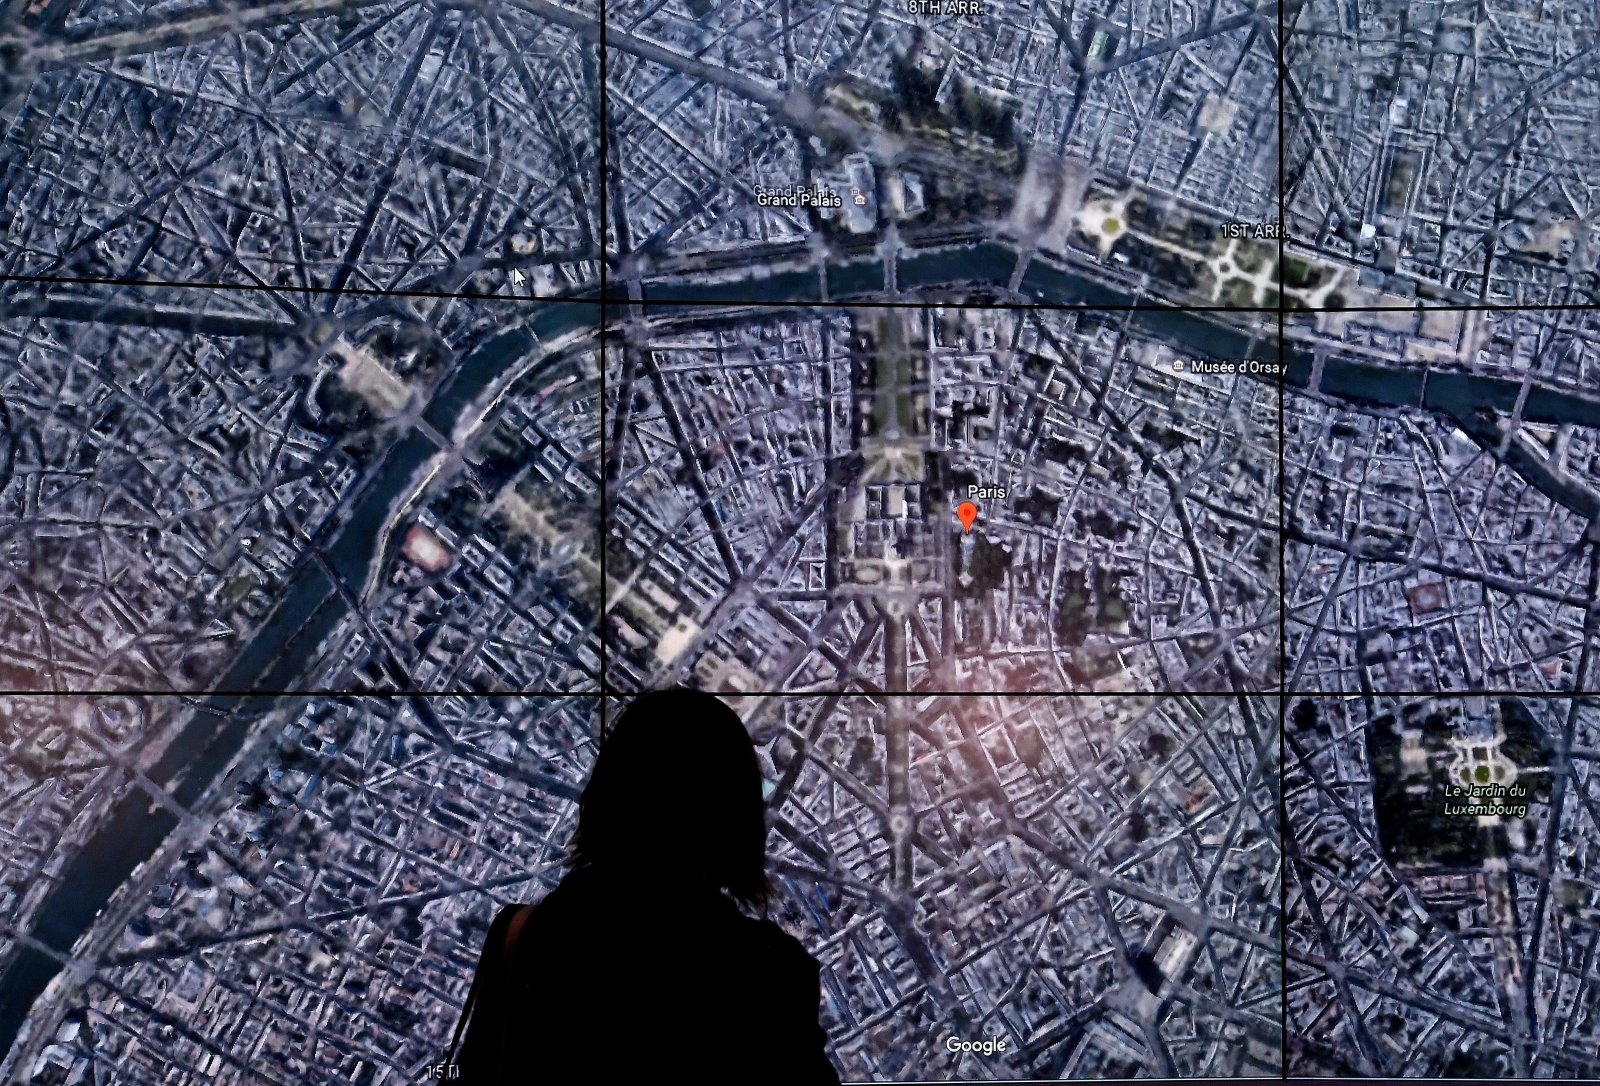 People look at a Google Earth map of Paris,France on a screen as Google Earth unveils the revamped version of the application April 18, 2017 at a event at New York's Whitney Museum of Art.  Google on Tuesday launched a re-imagined version of its free Earth mapping service, weaving in storytelling and artificial intelligence and freeing it from apps. / AFP PHOTO / TIMOTHY A. CLARY        (Photo credit should read TIMOTHY A. CLARY/AFP/Getty Images)